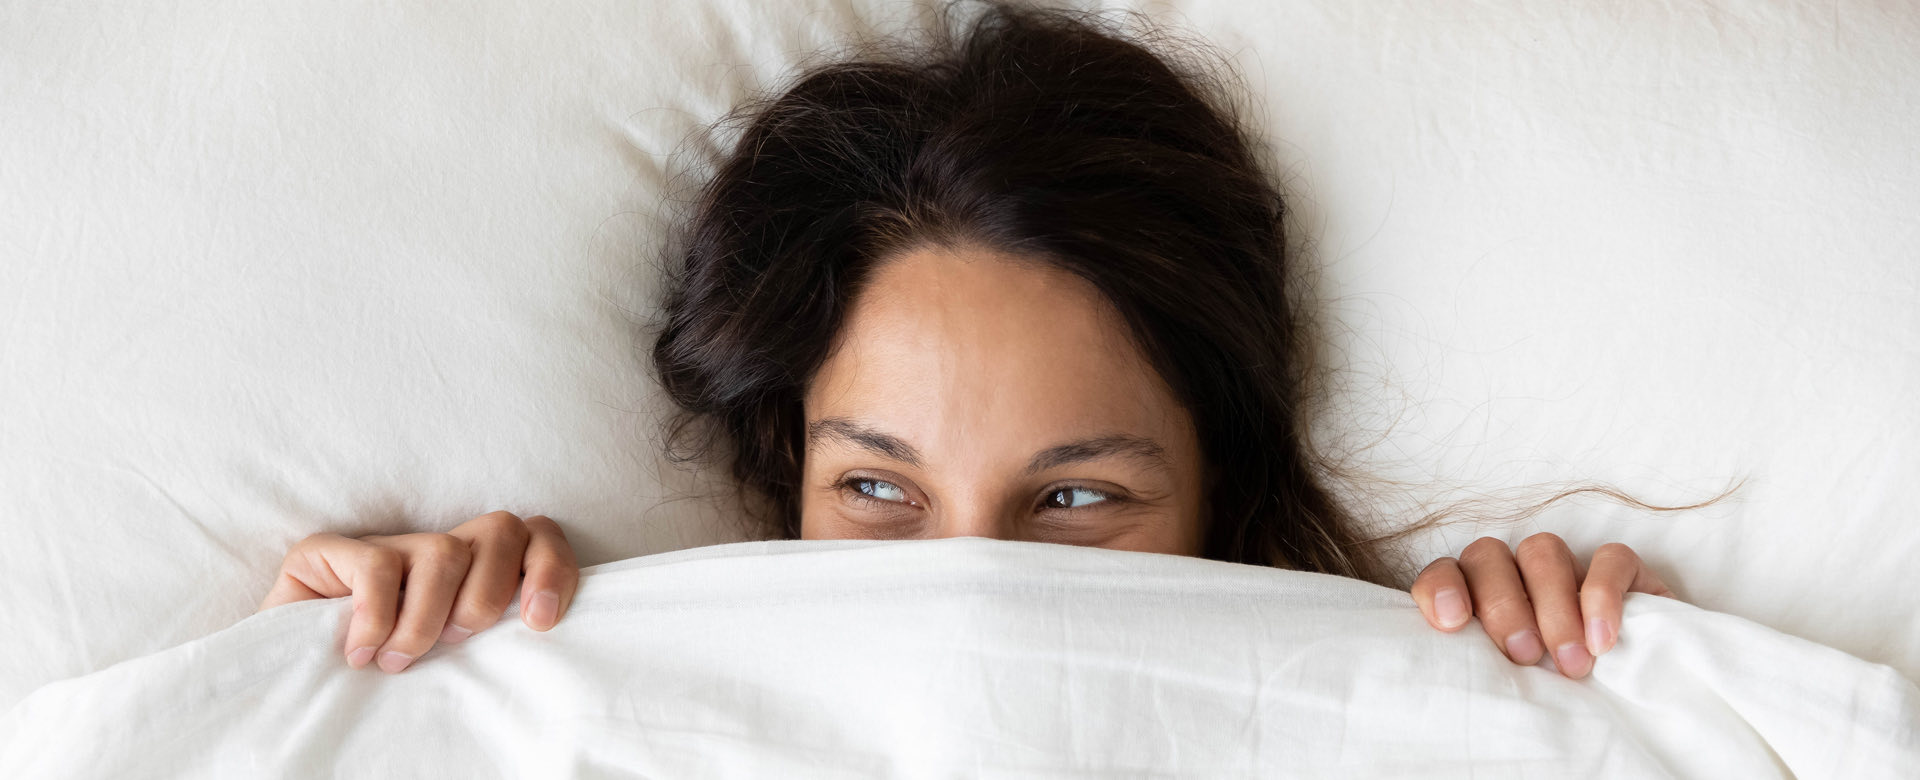 woman laying in bed holding white bedsheets just below her eyes